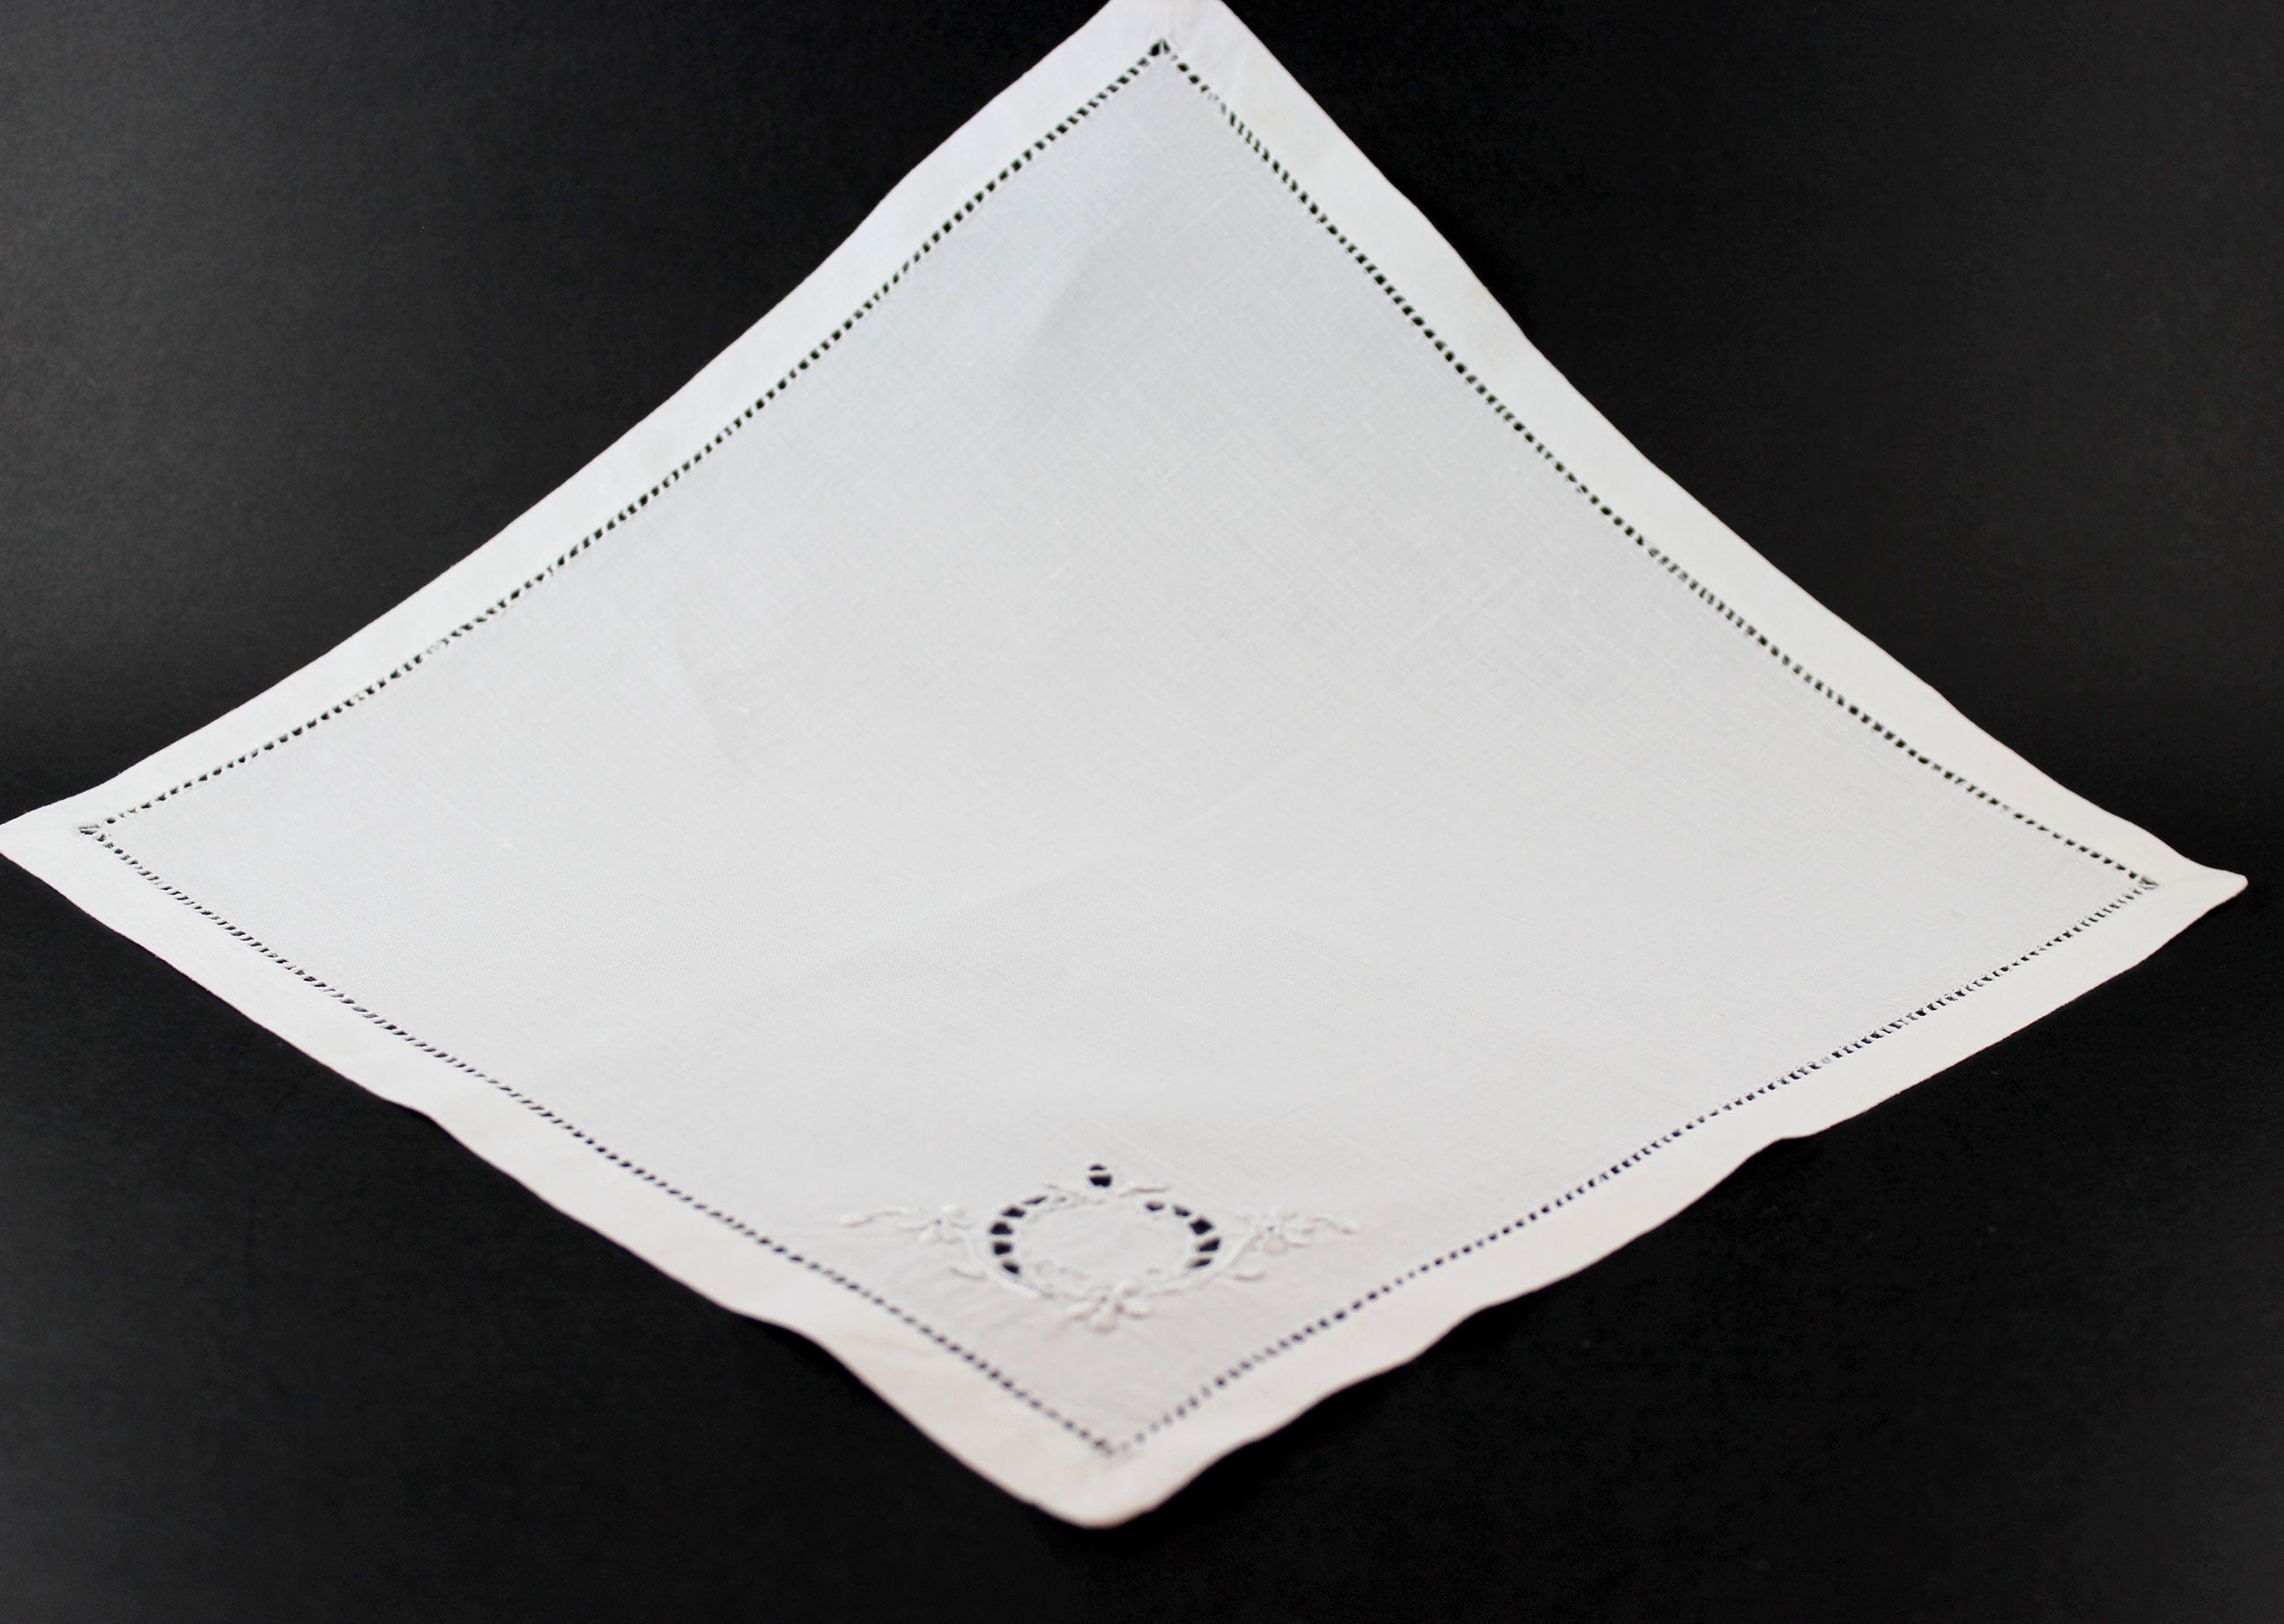 Linen Luncheon or Tea Napkins with White Work EmbroideryLinen Luncheon or Tea Napkins with White Work Embroidery